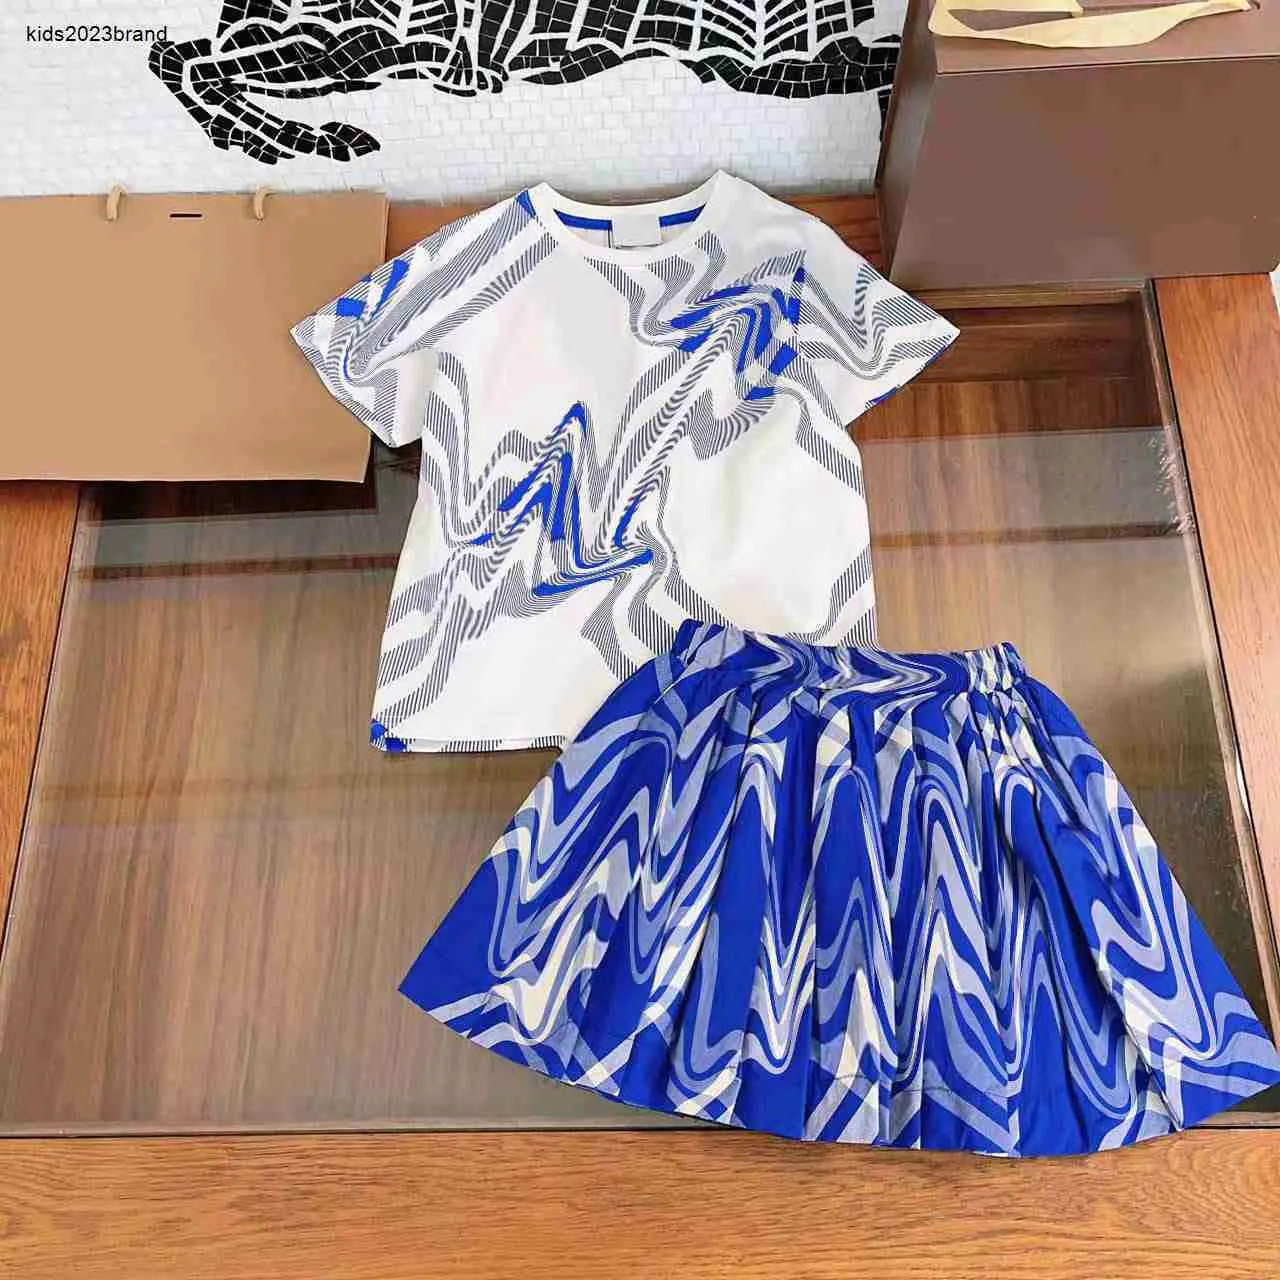 New kids dress sets child tracksuits baby girl clothes Size 100-160 CM Blue striped print Short sleeved shirt and Khaki short skirt 24Feb20